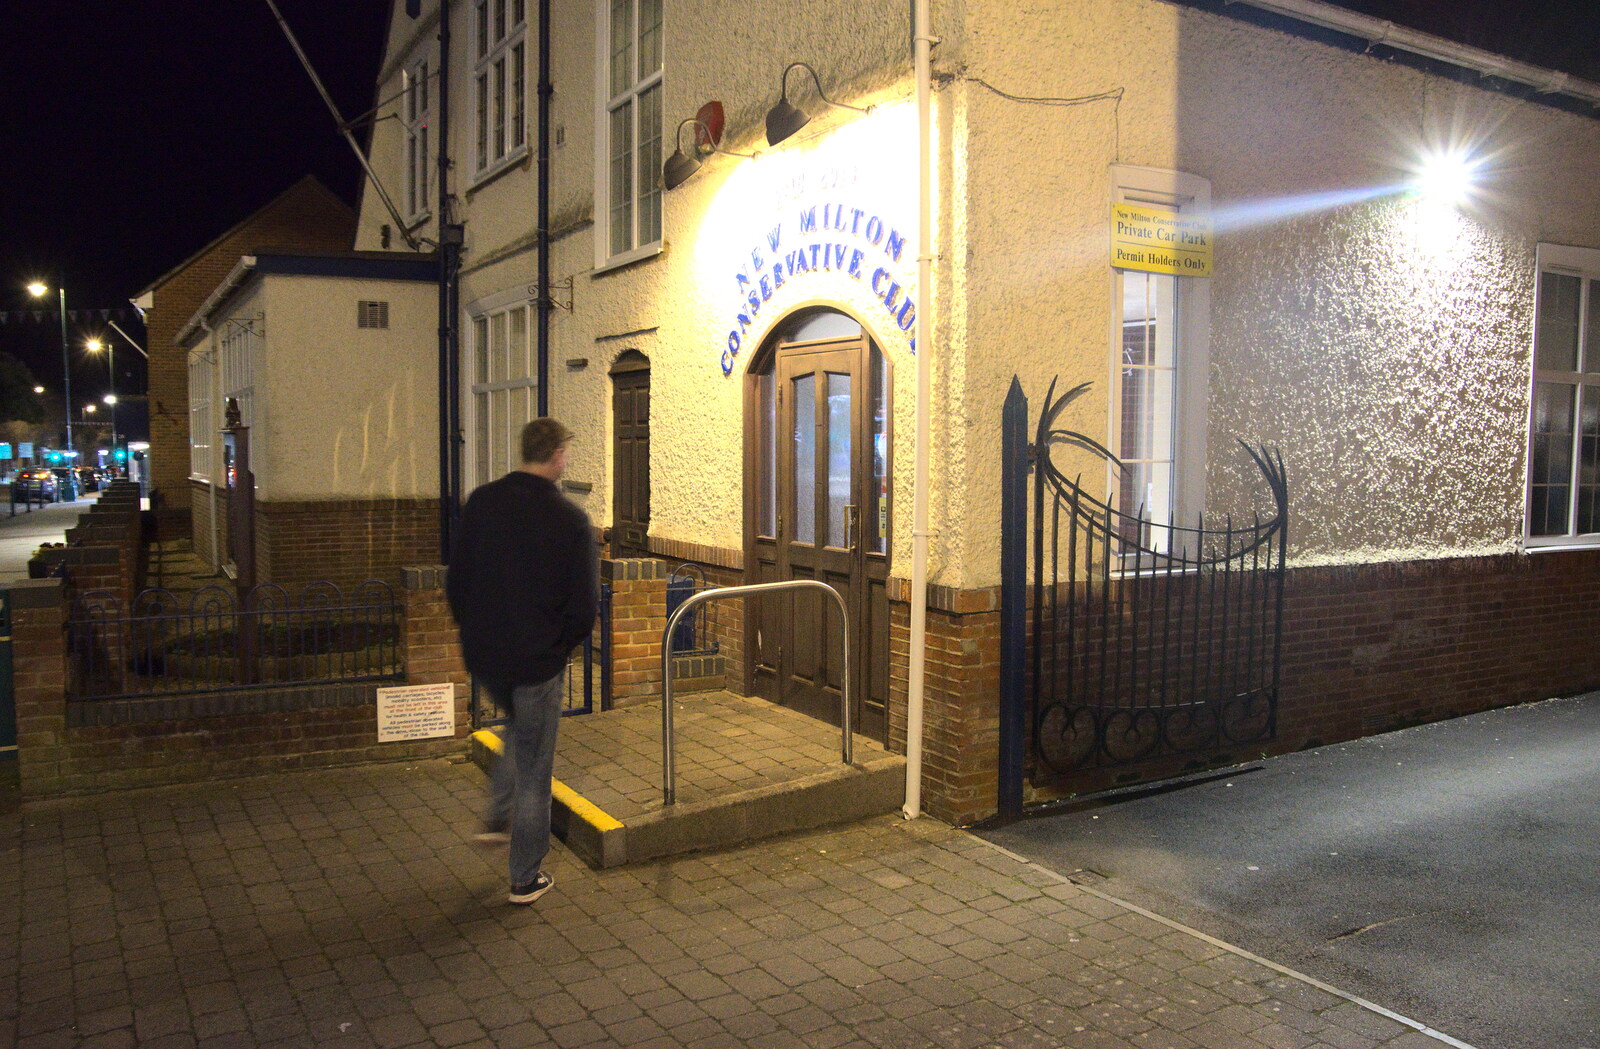 A Trip Down South, New Milton, Hampshire - 9th April 2022: We actually visit the Conservative Club